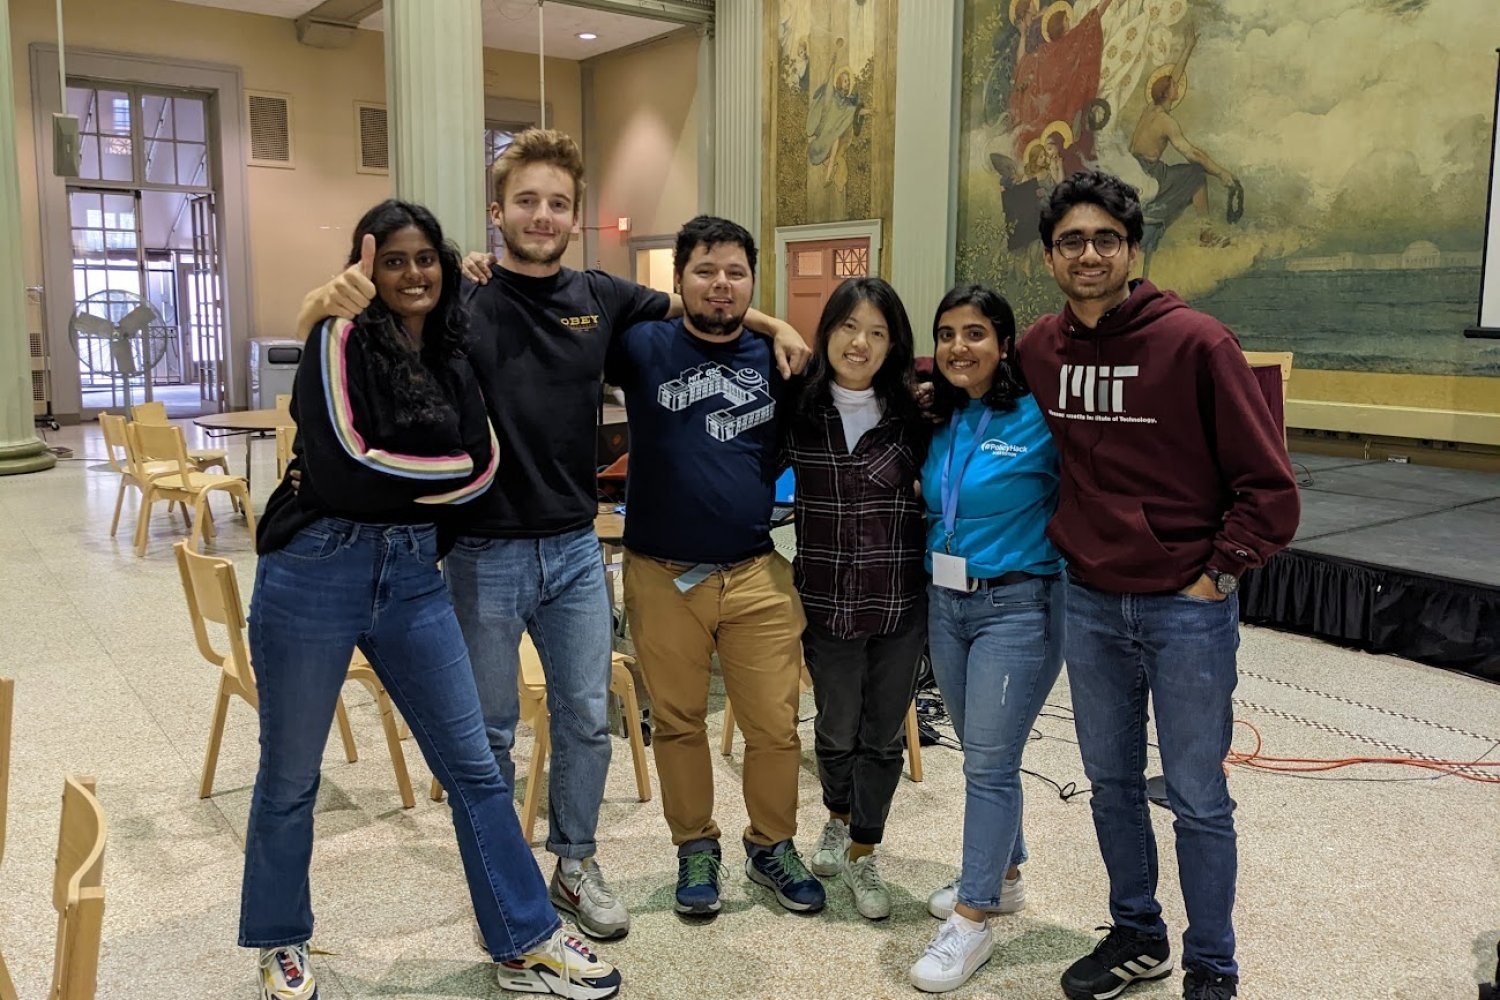 Some of the IDSS students who organized the MIT Policy Hackathon are (from left to right): Deepika Raman, Adrien Concordel, Jorge Sandoval, Aurora Zhang, Pragya Neupane, and Nirmal Bhatt.